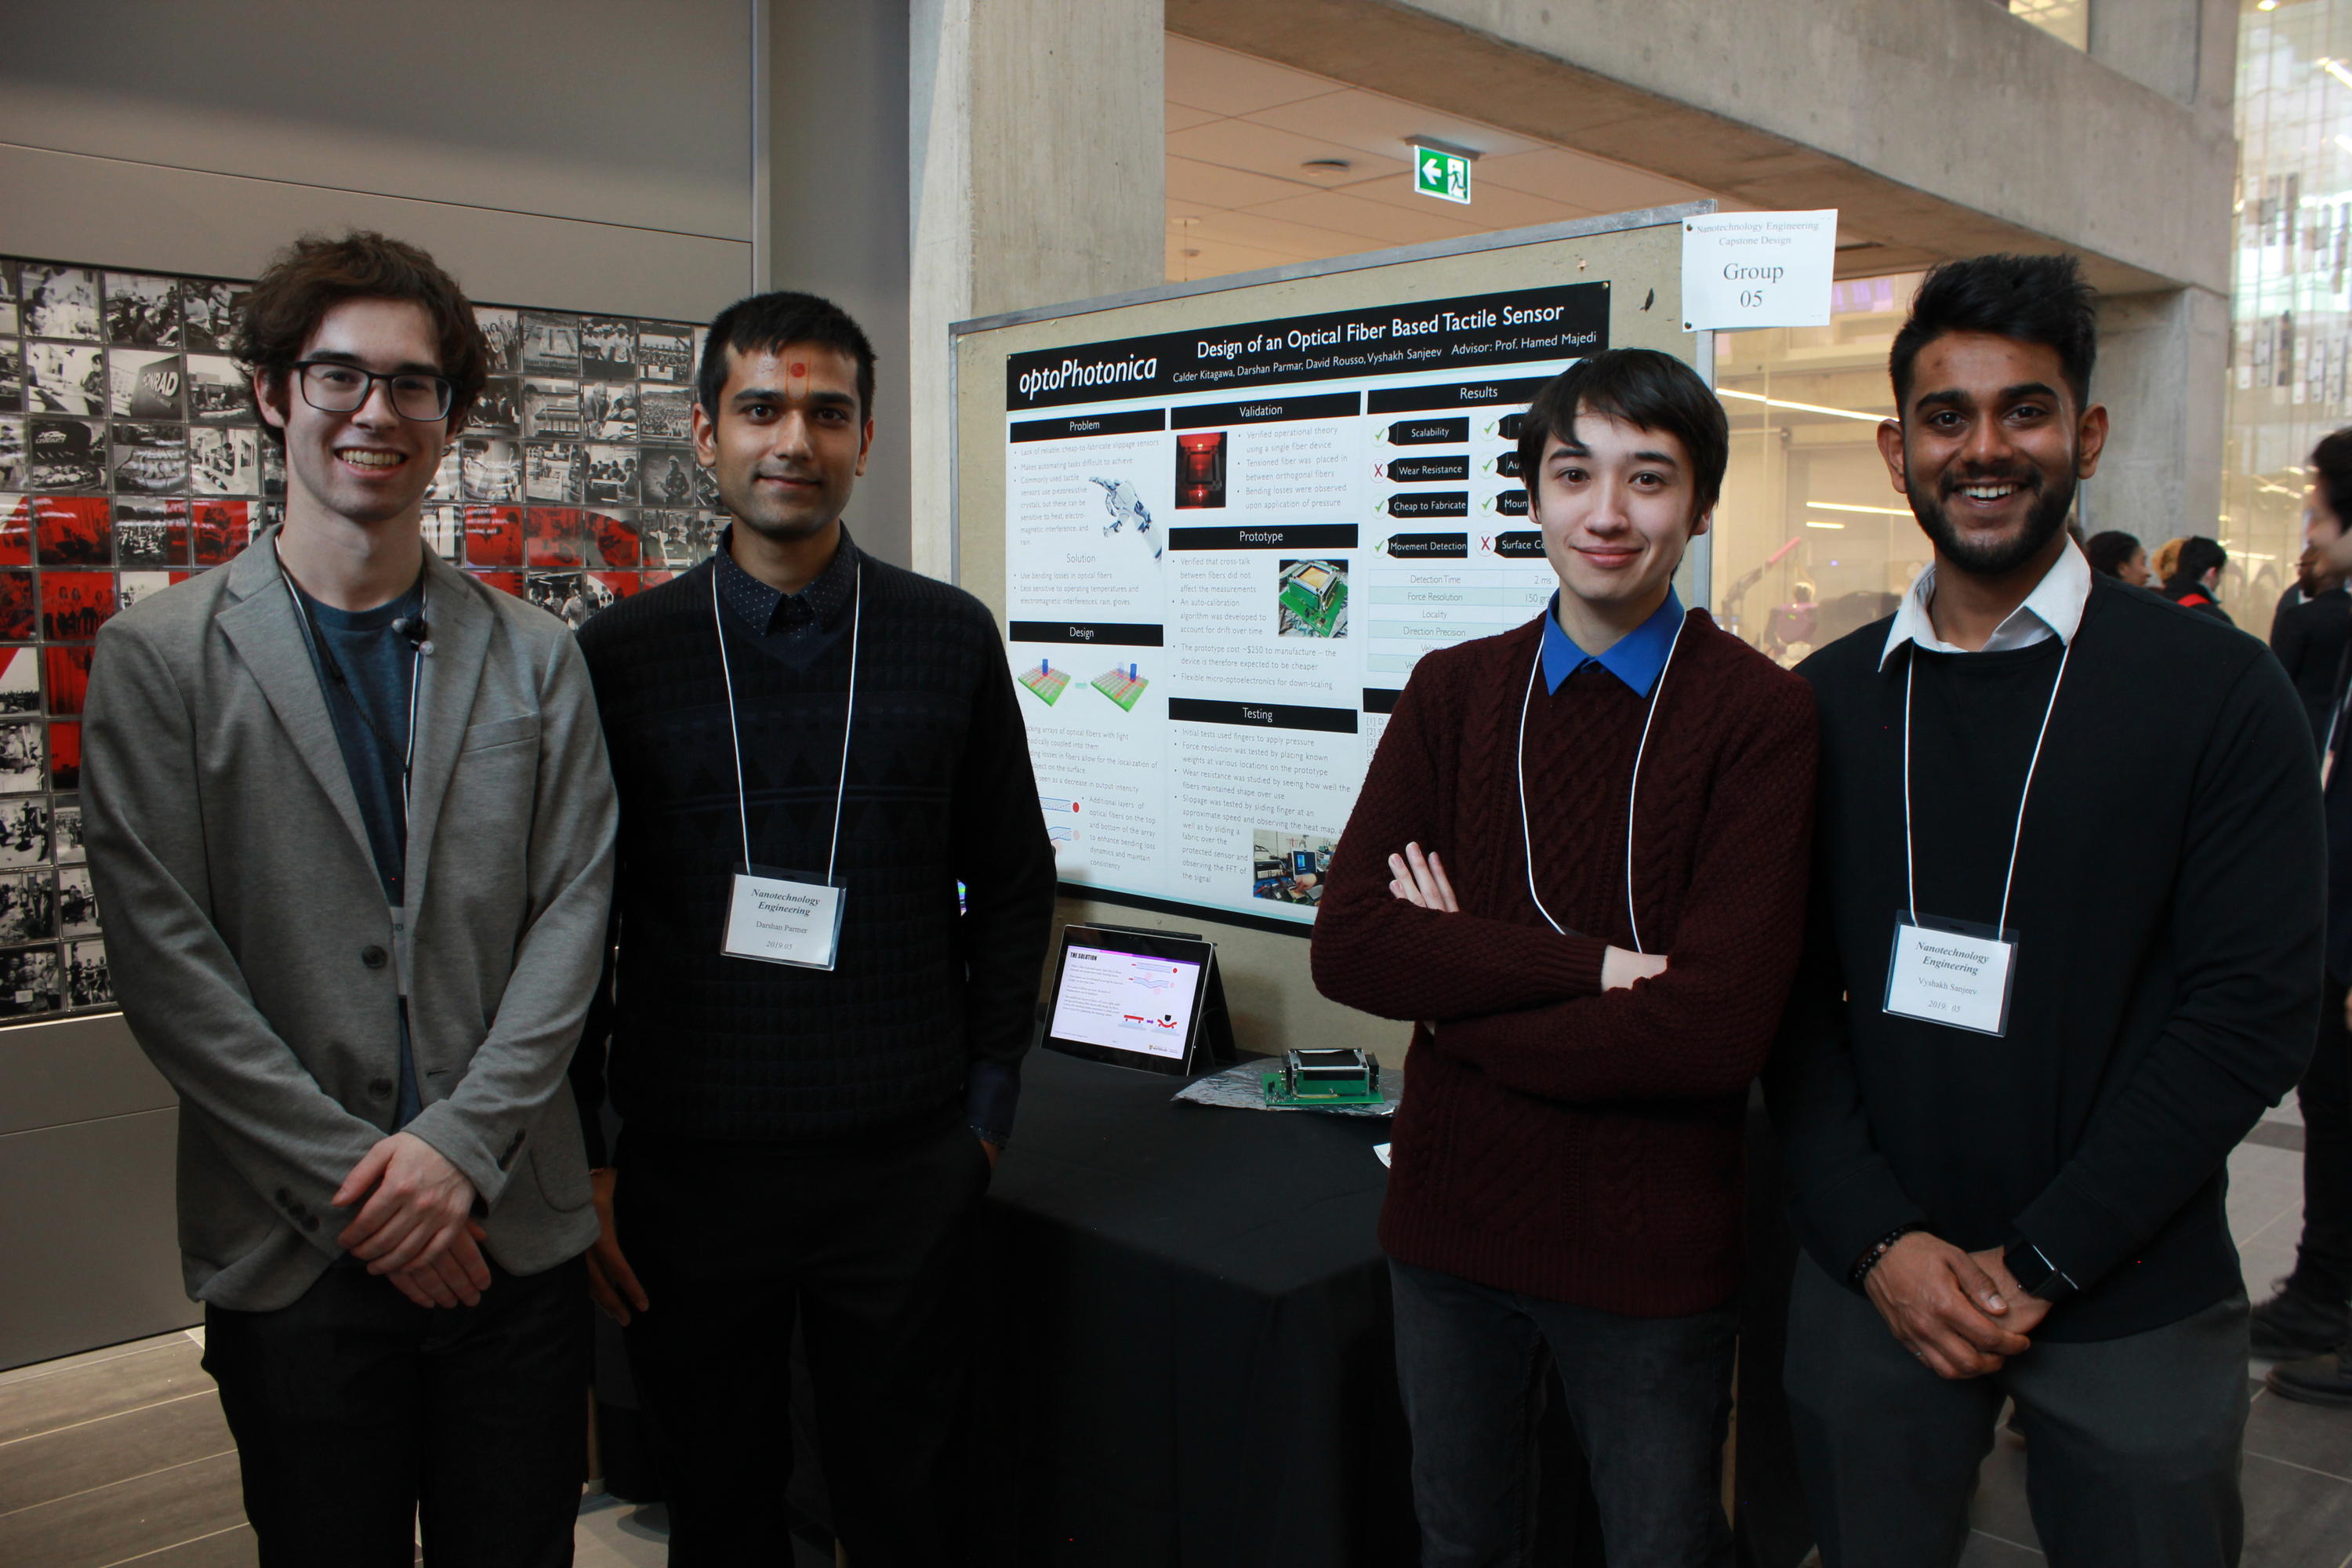 Team 5 students with their project poster at the 2019 Capstone Design Symposium.